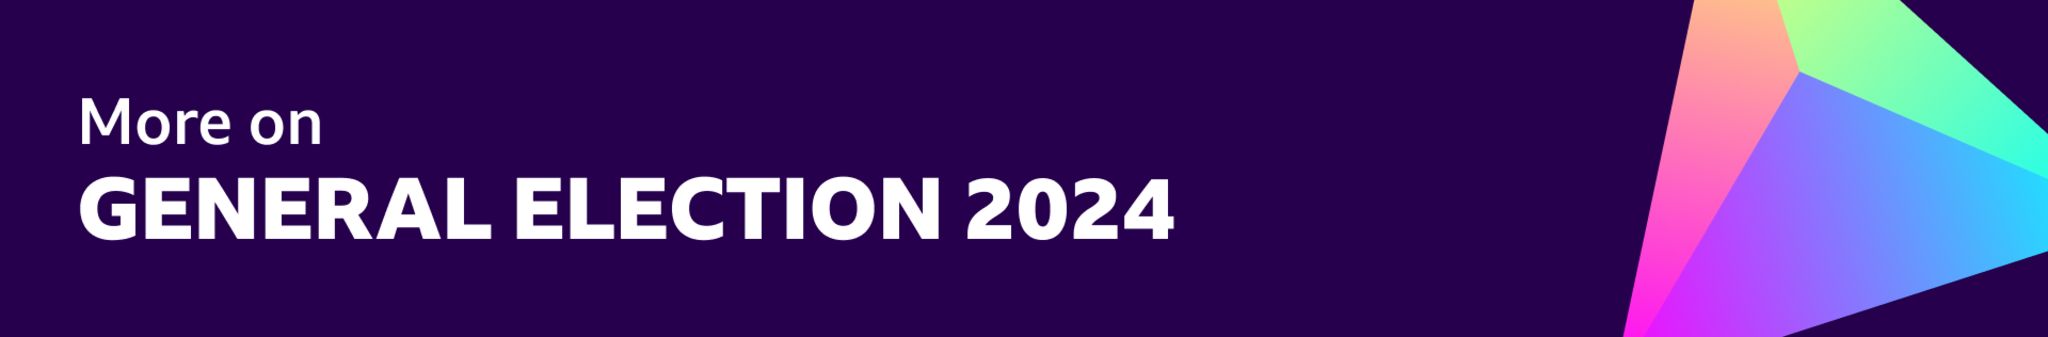 Graphic displaying the words: More on General Election 2024